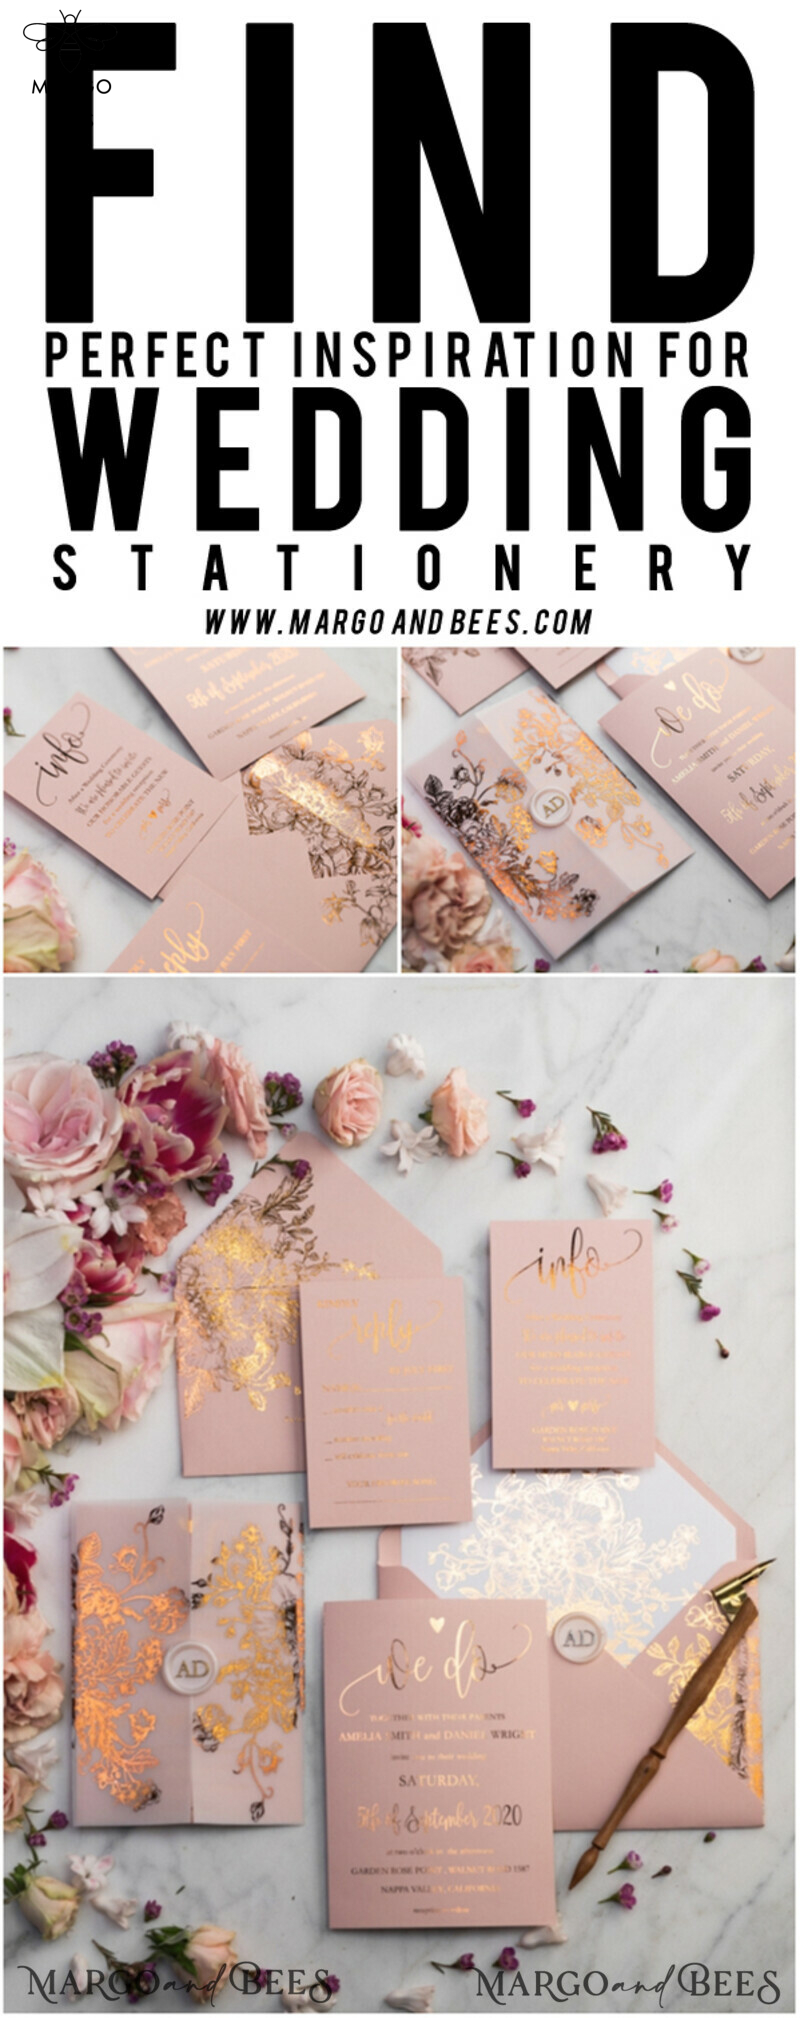 Luxury Vellum Gold Foil Wedding Invitations: Elegant Blush Pink Invitation Suite with Glamour Wedding Cards and Golden Shine-62